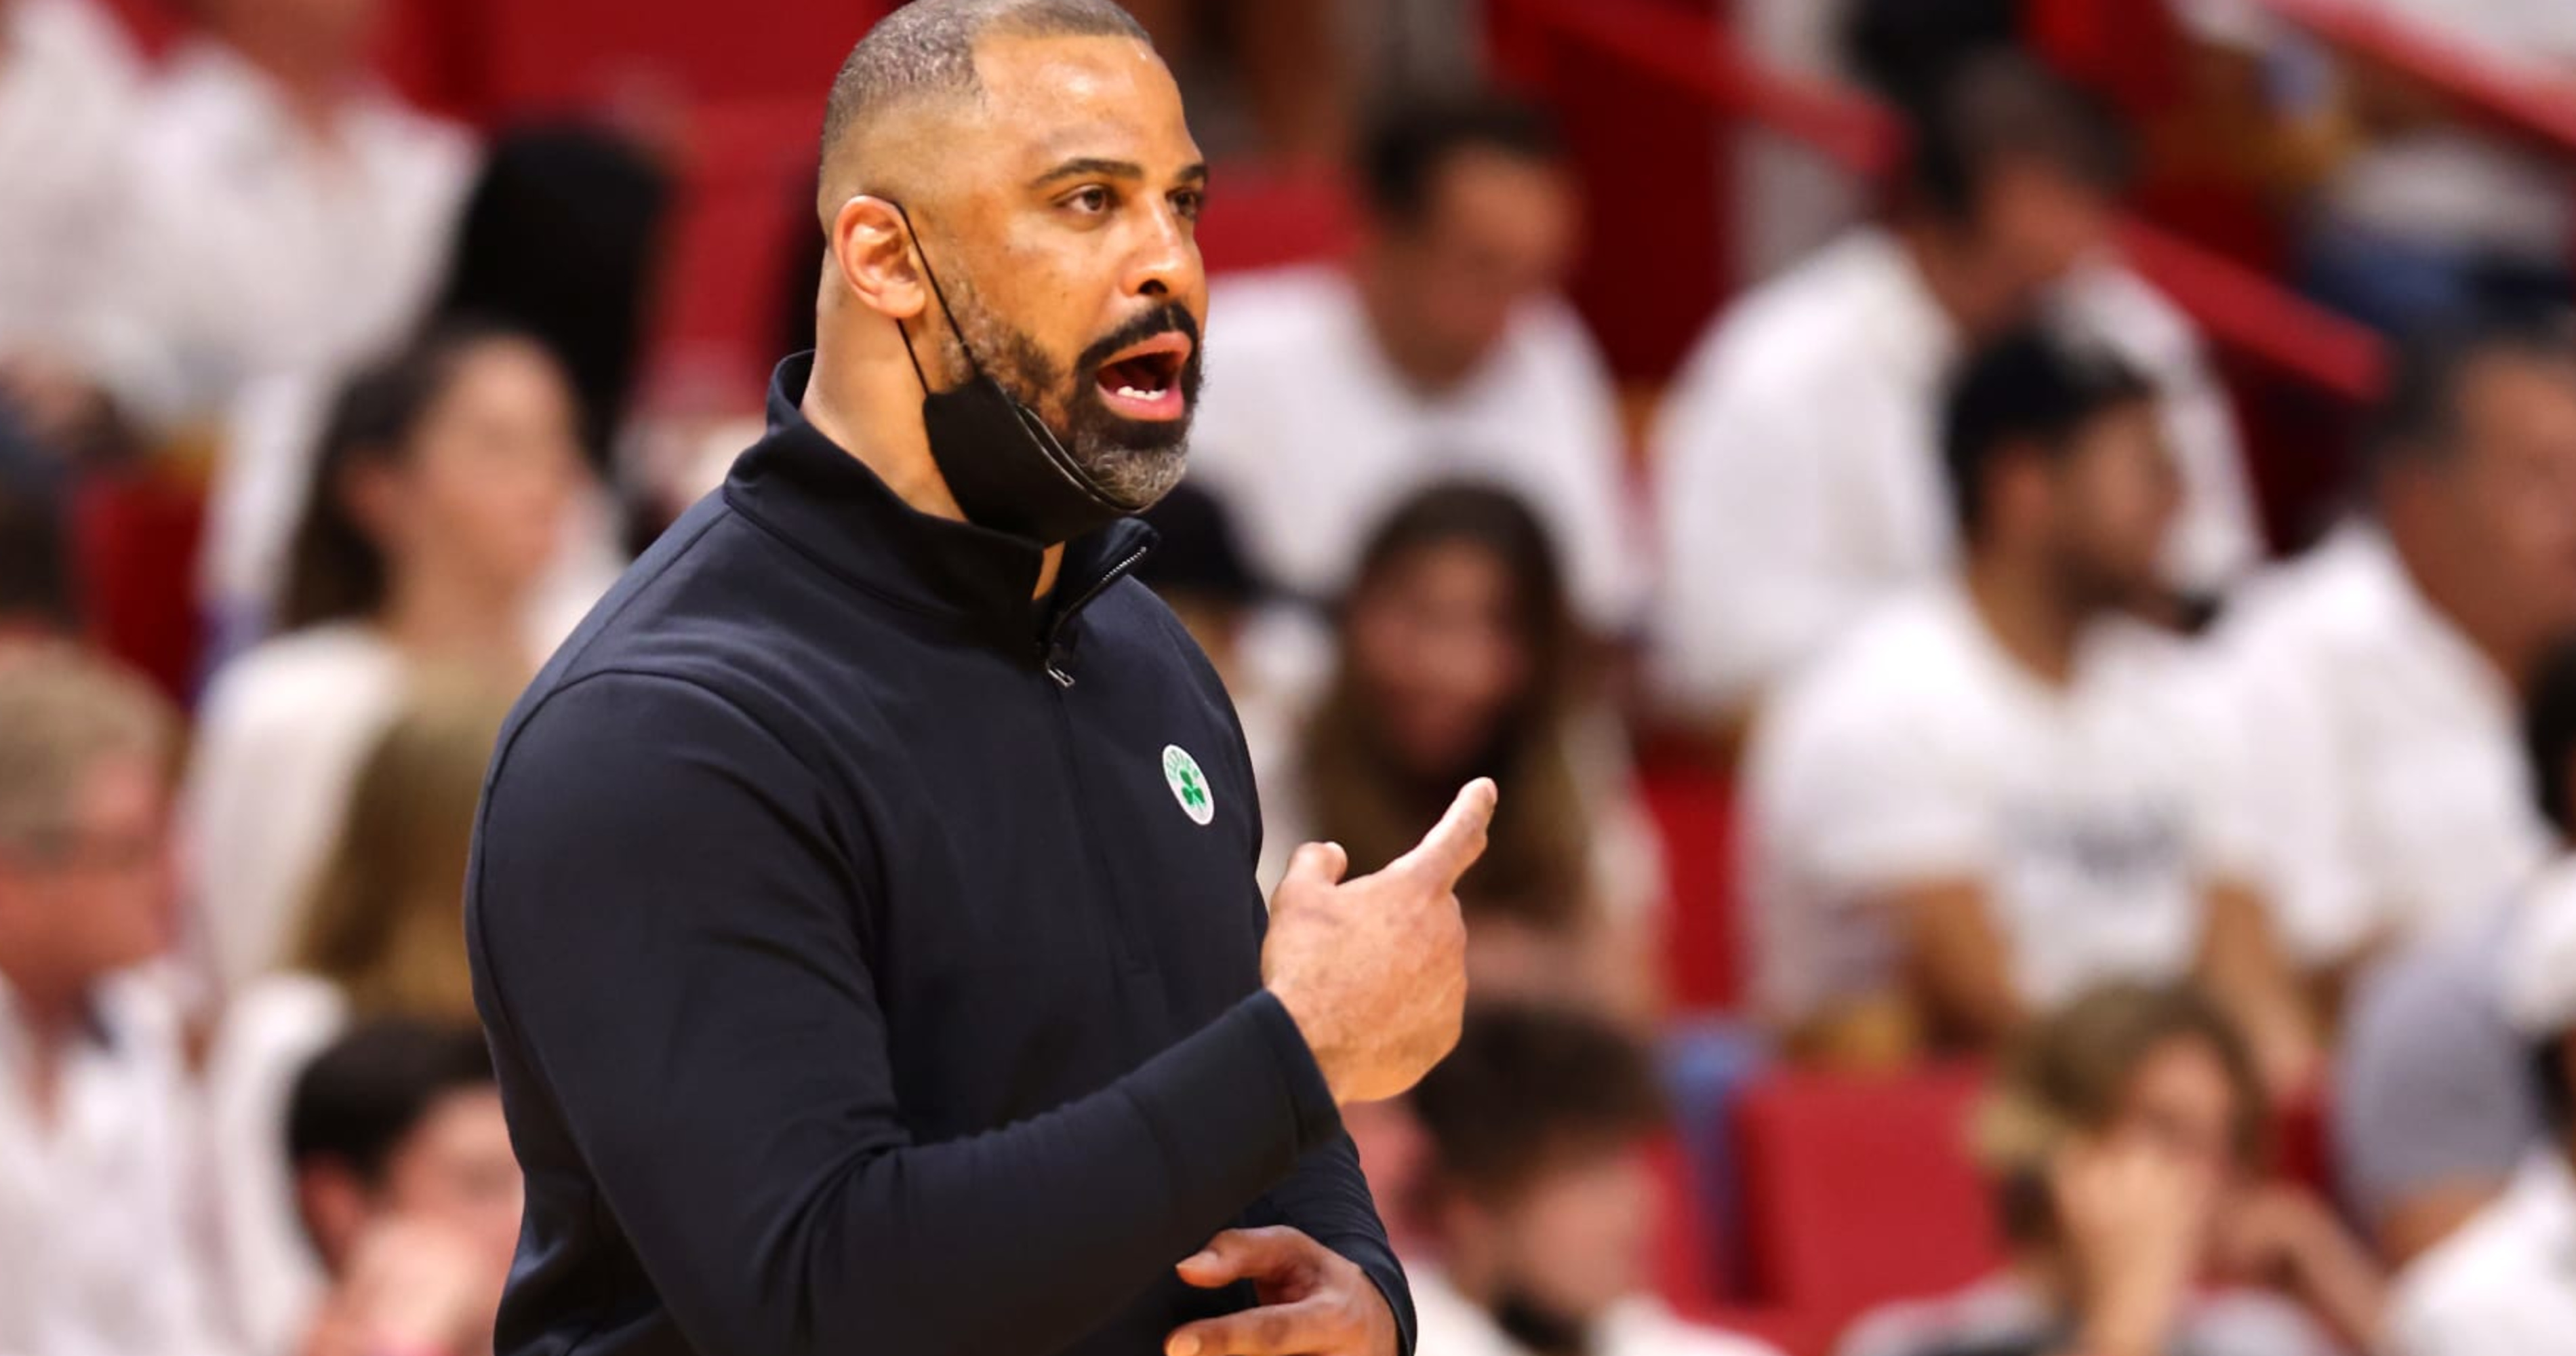 Report: Celtics' Ime Udoka Likely Suspended for Season for Relationship With Sta..